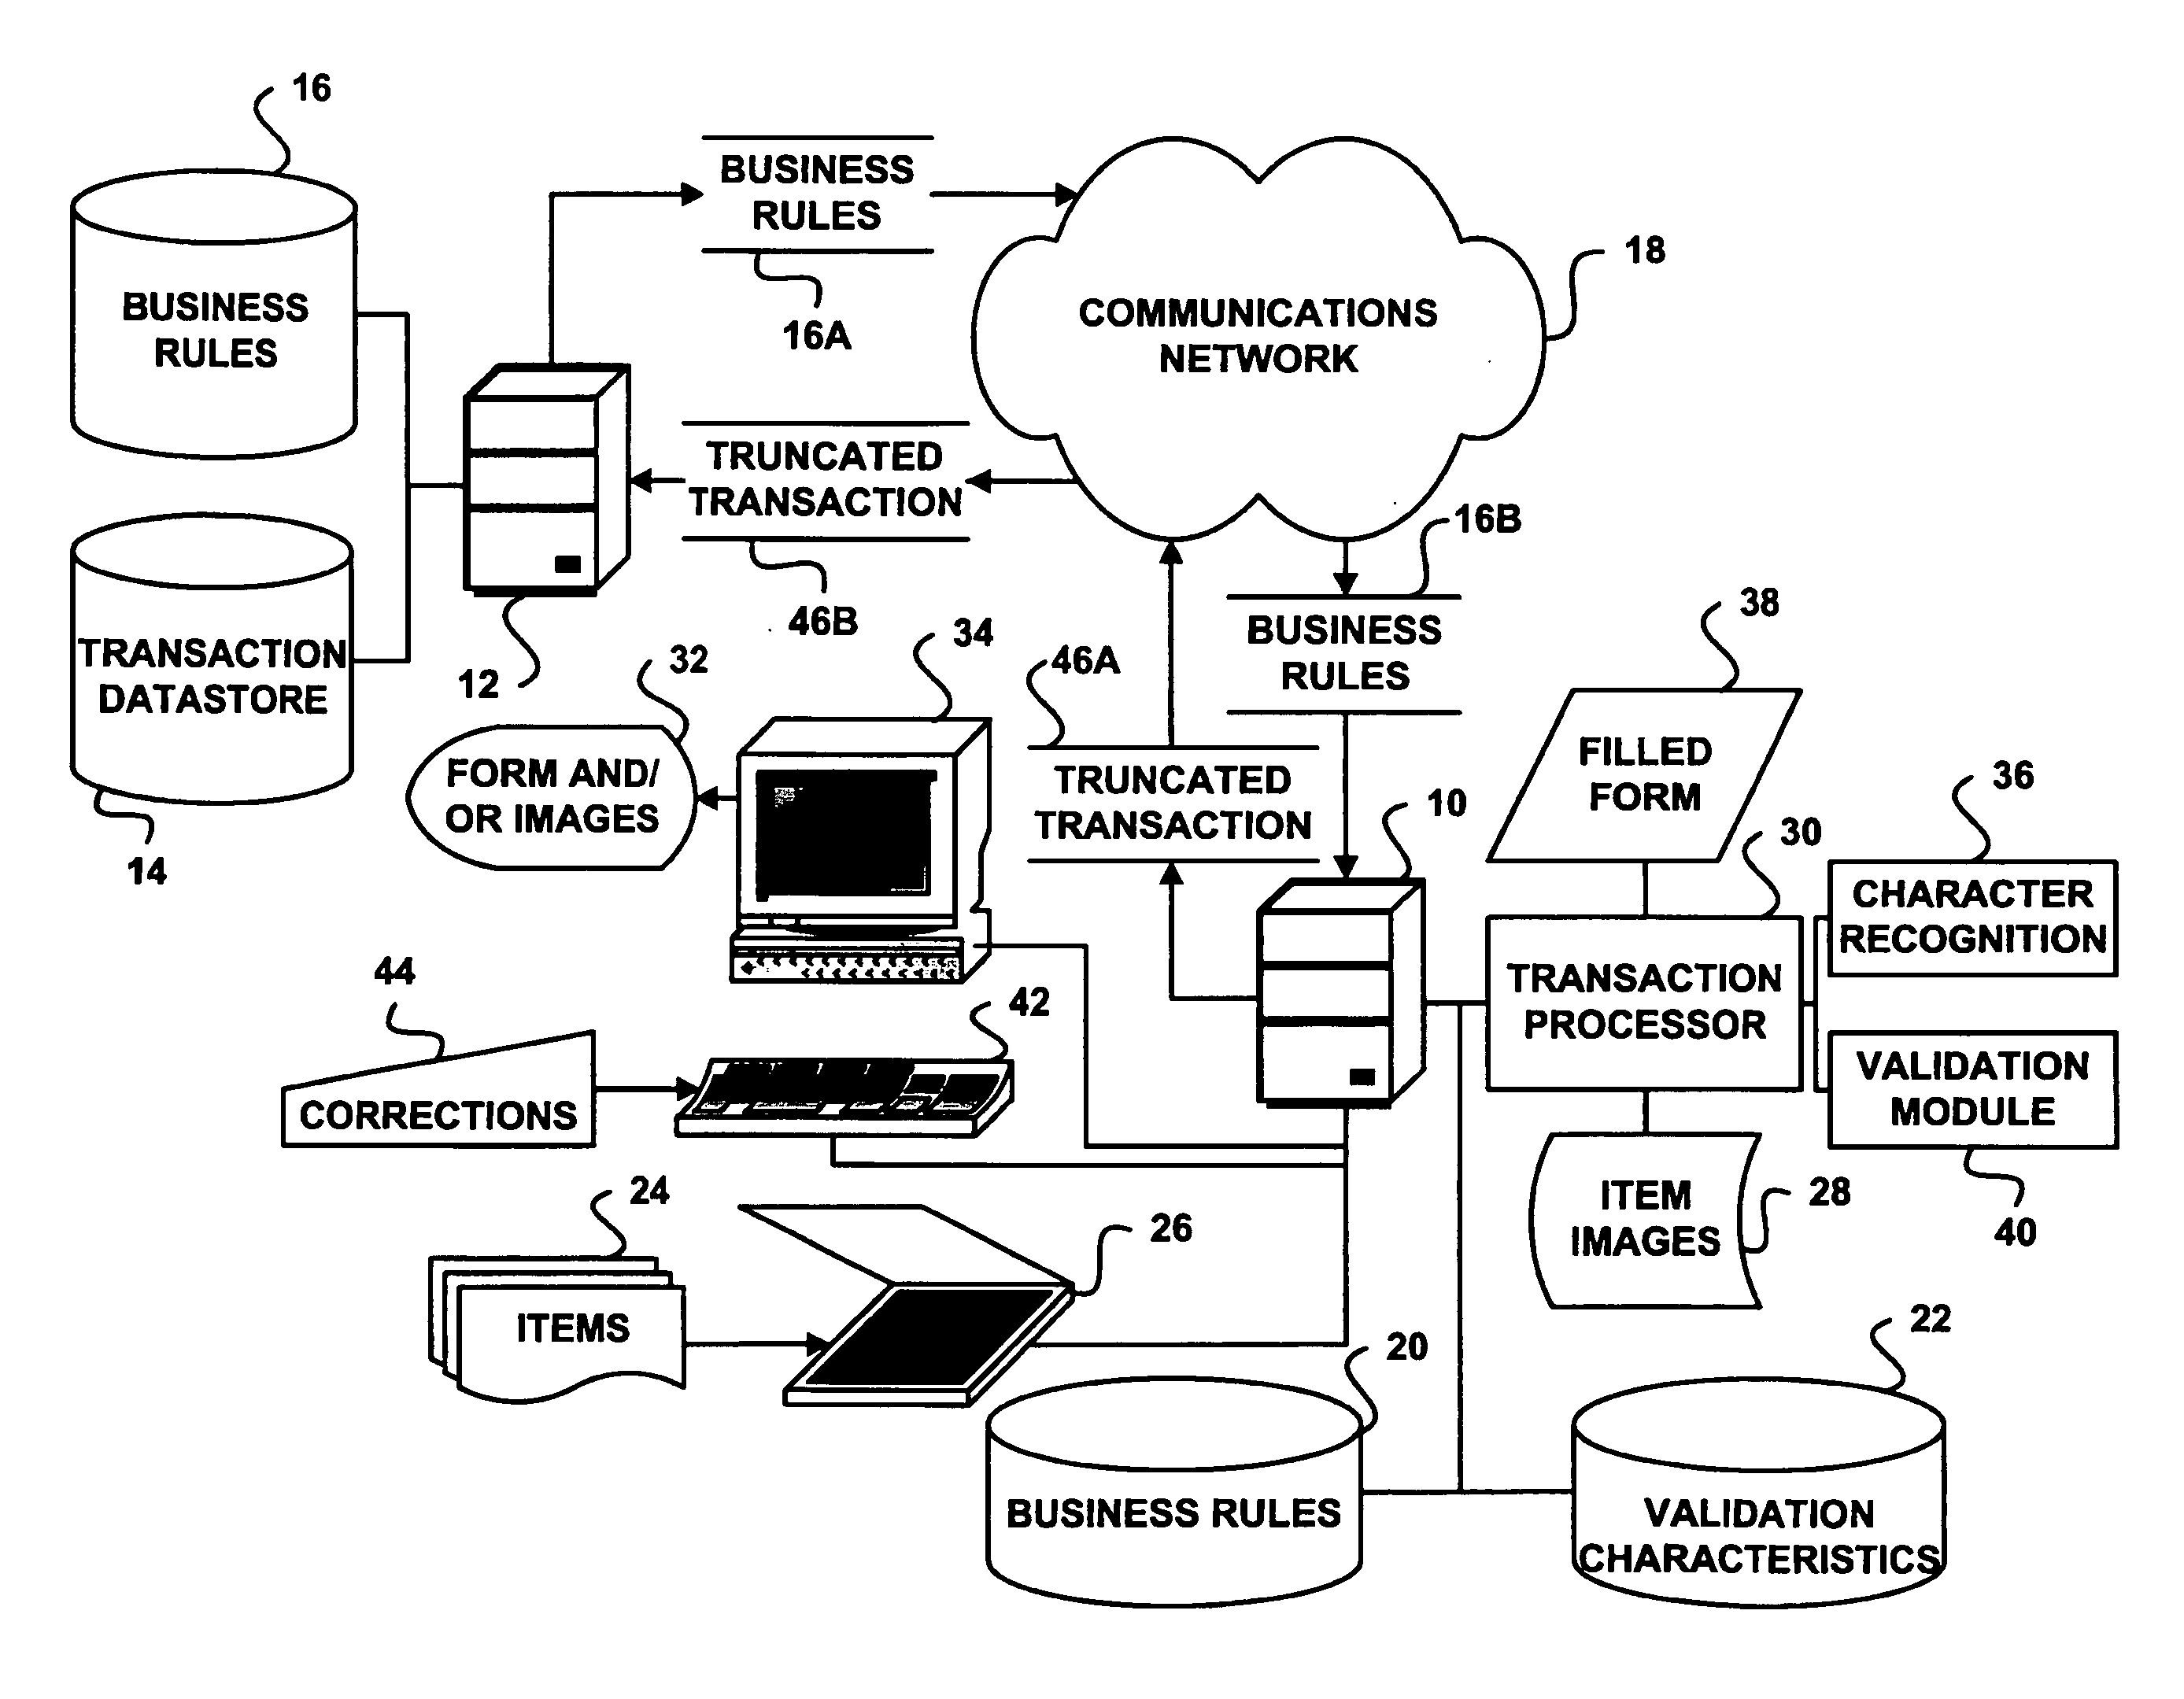 Image-enabled item processing for point of presentment application